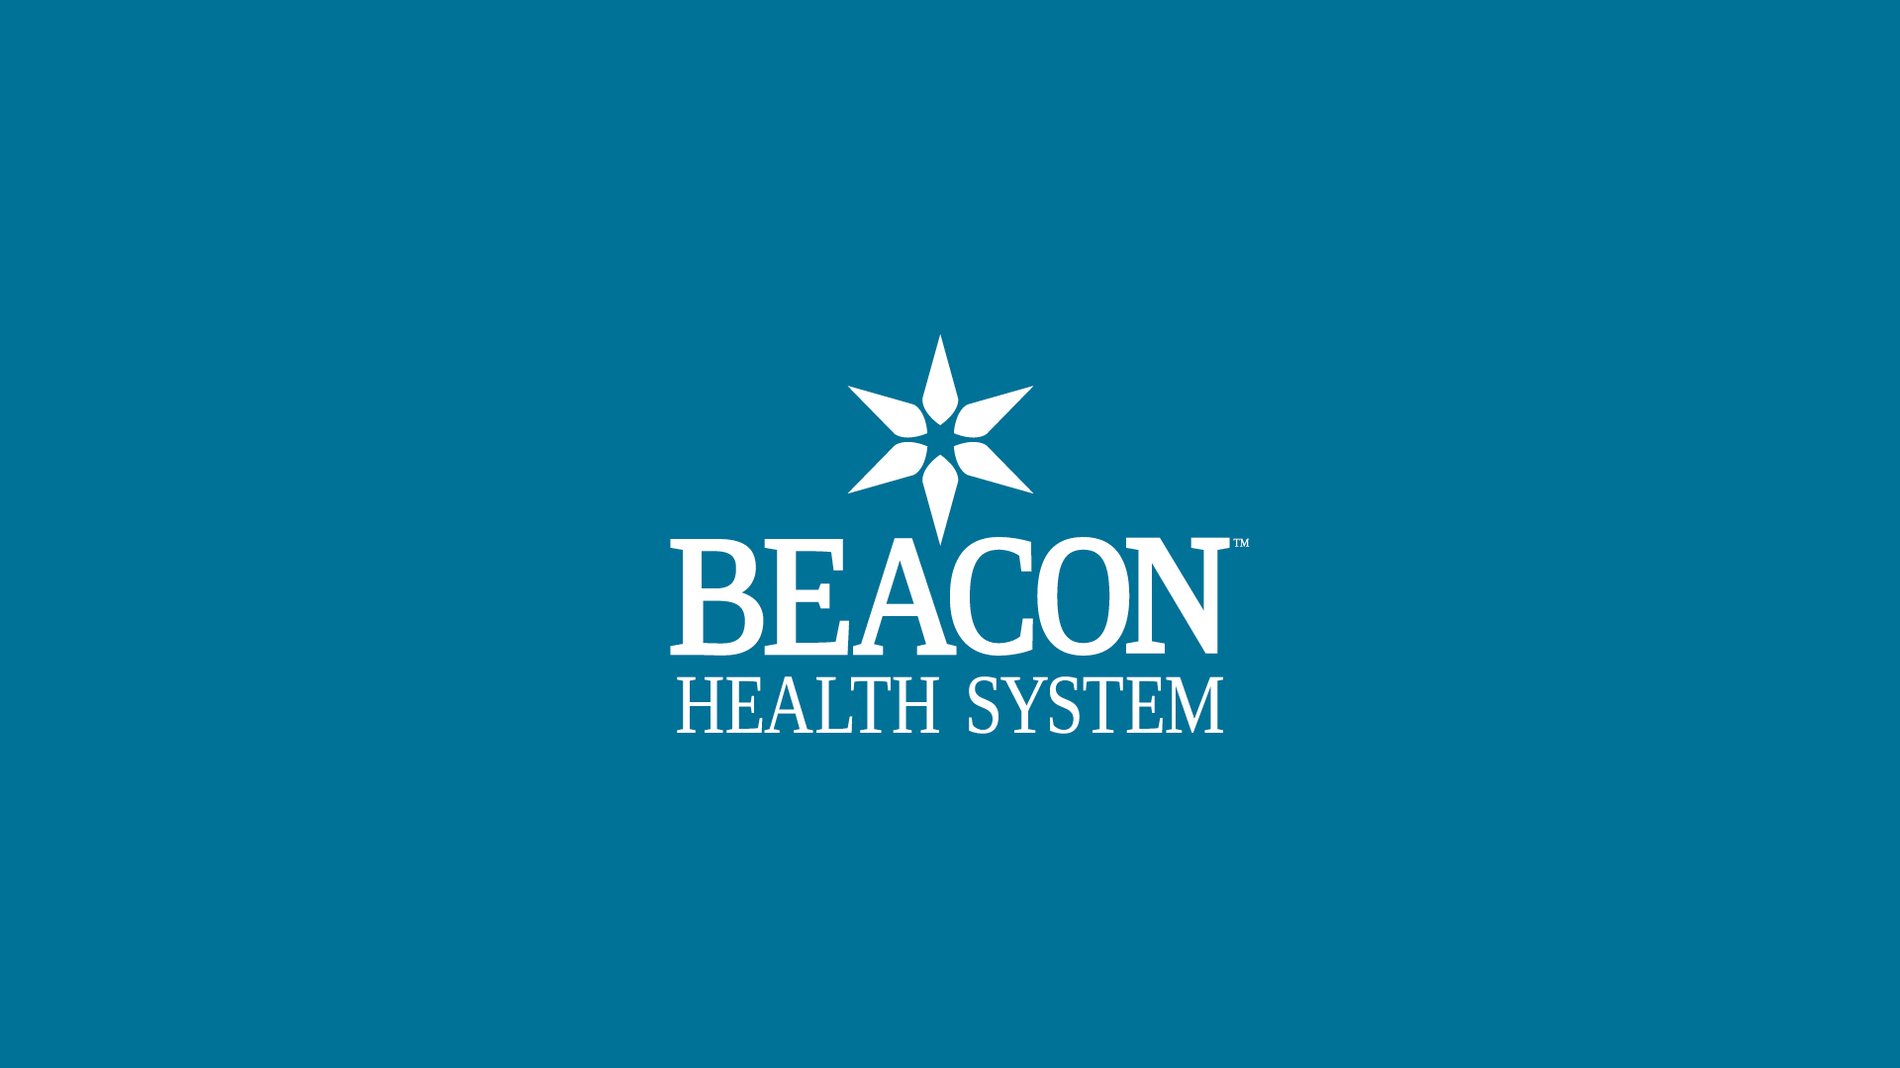 Beacon Health System white logo on teal background with star icon.